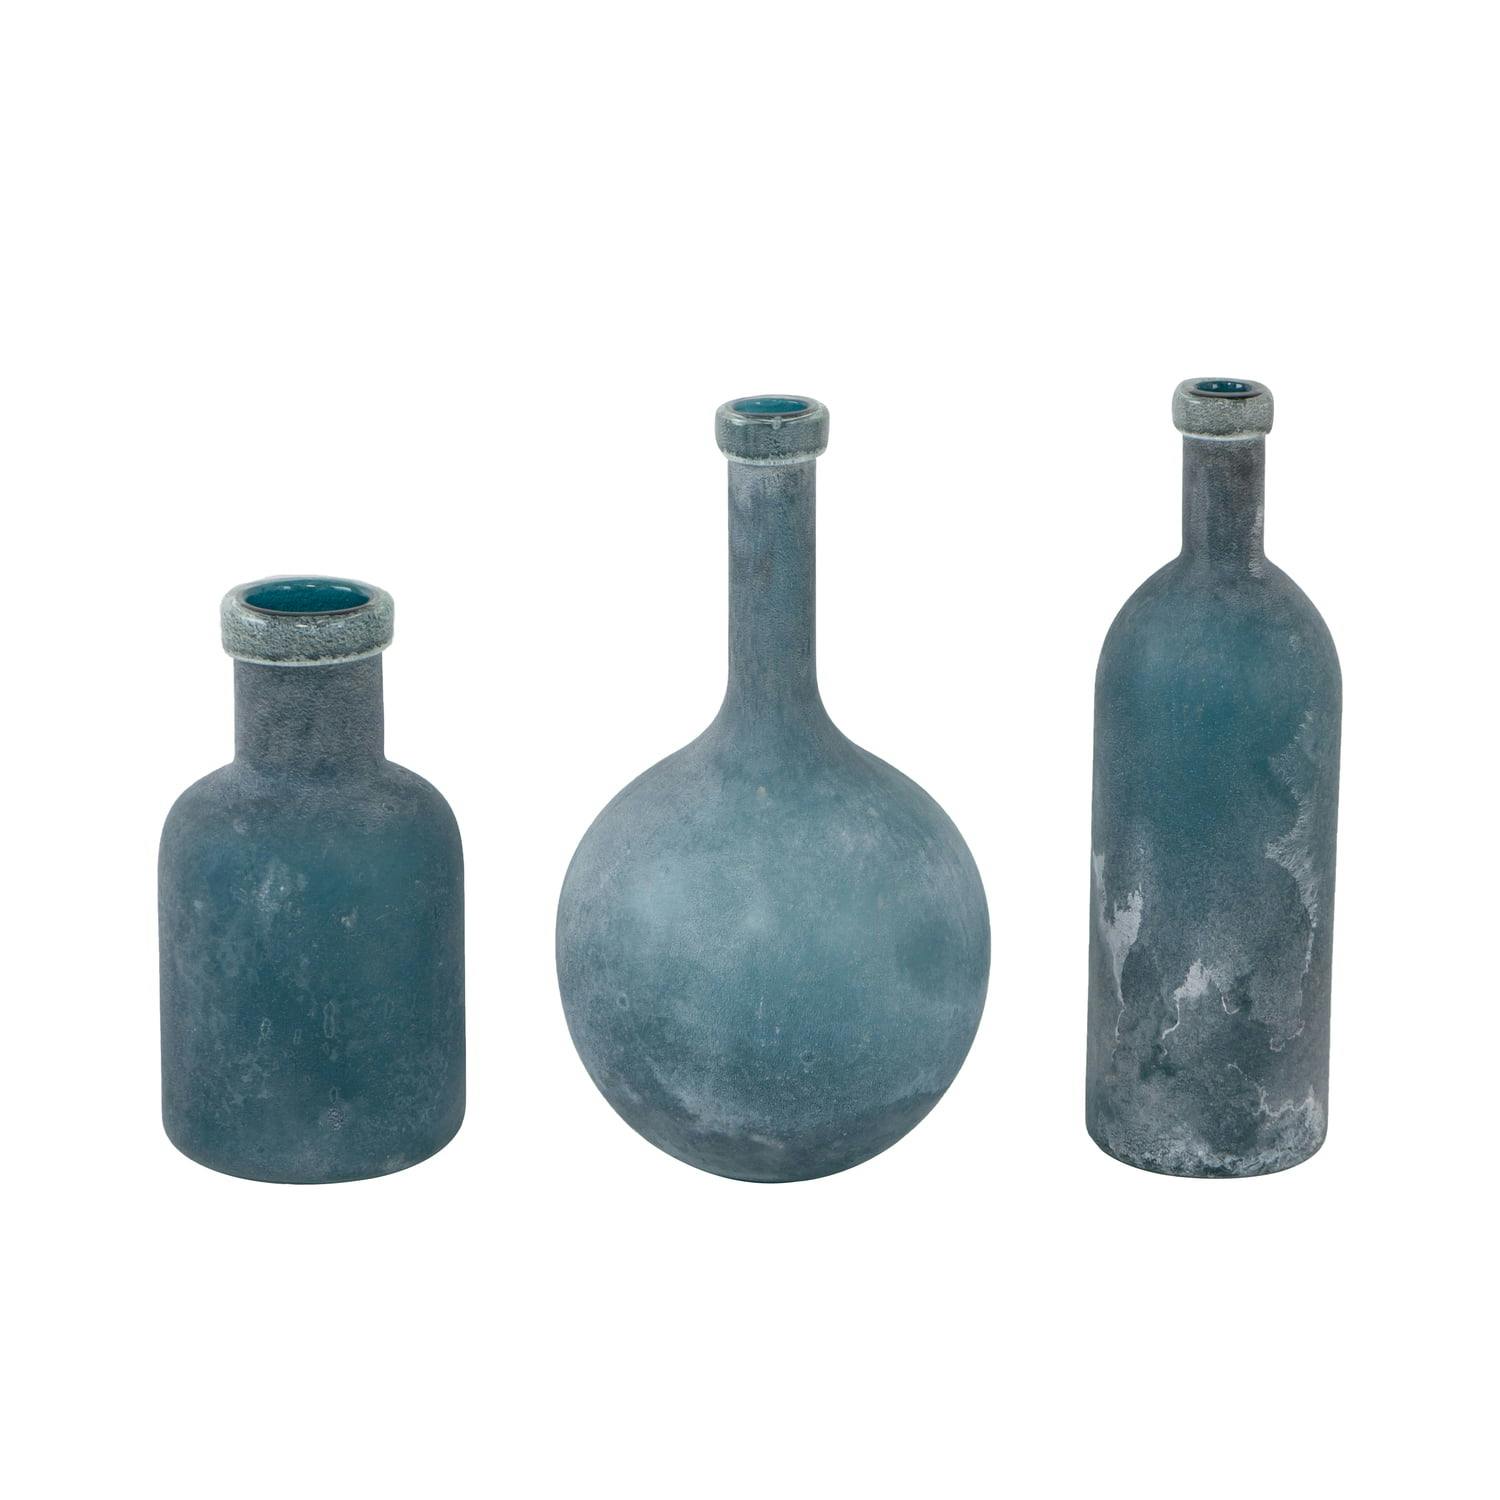 Set of 3 Rustic Blue and White Textured Glass Bottle Vases